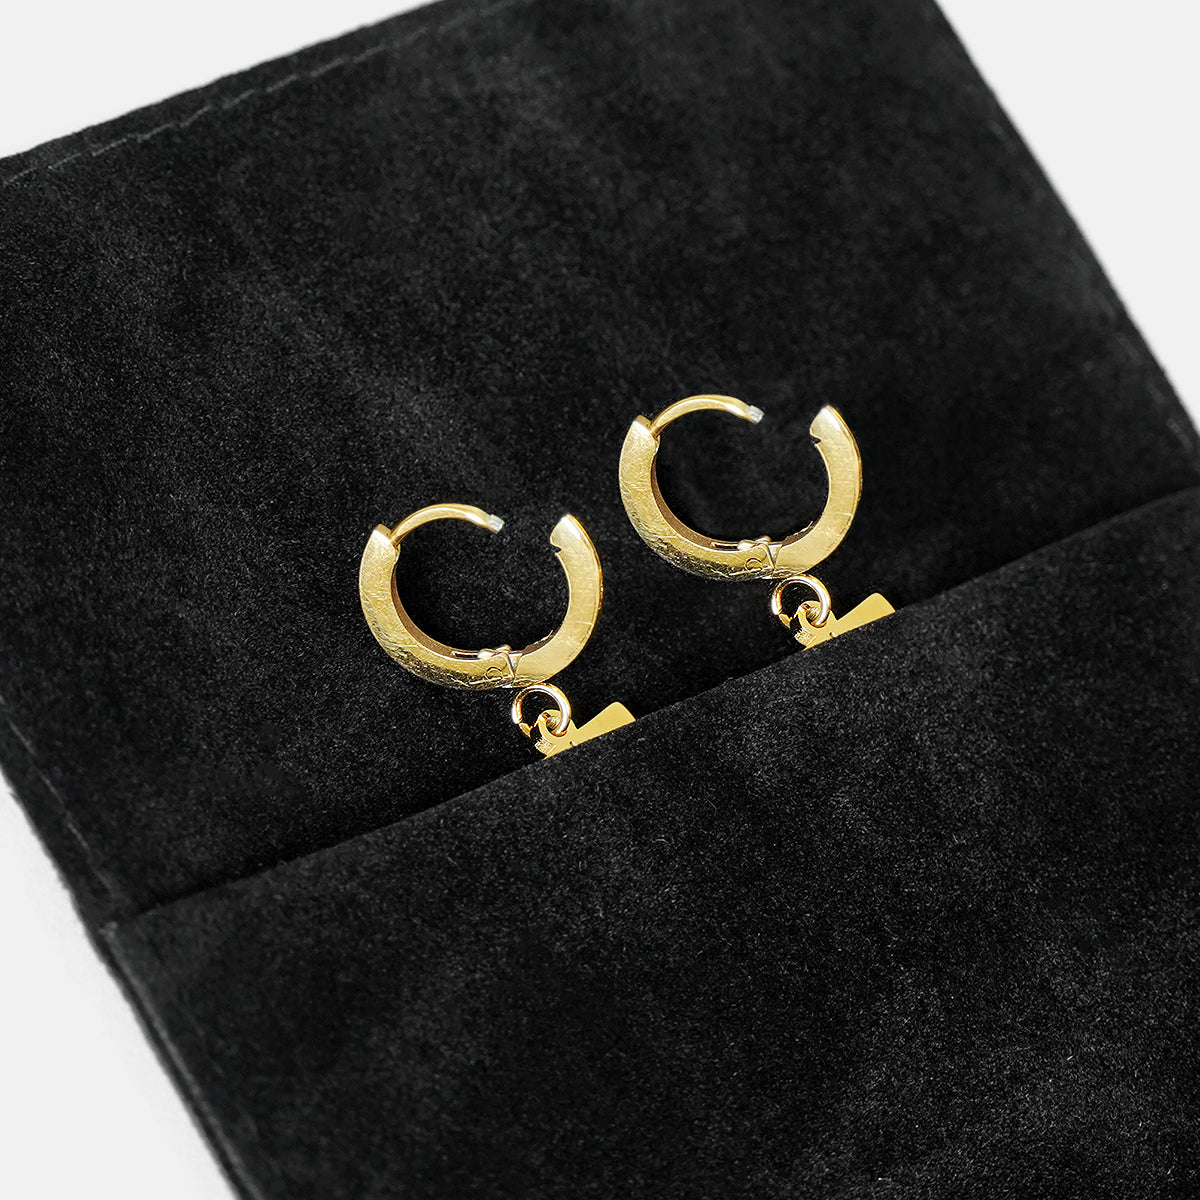 58 Number Earring - Gold Plated Stainless Steel